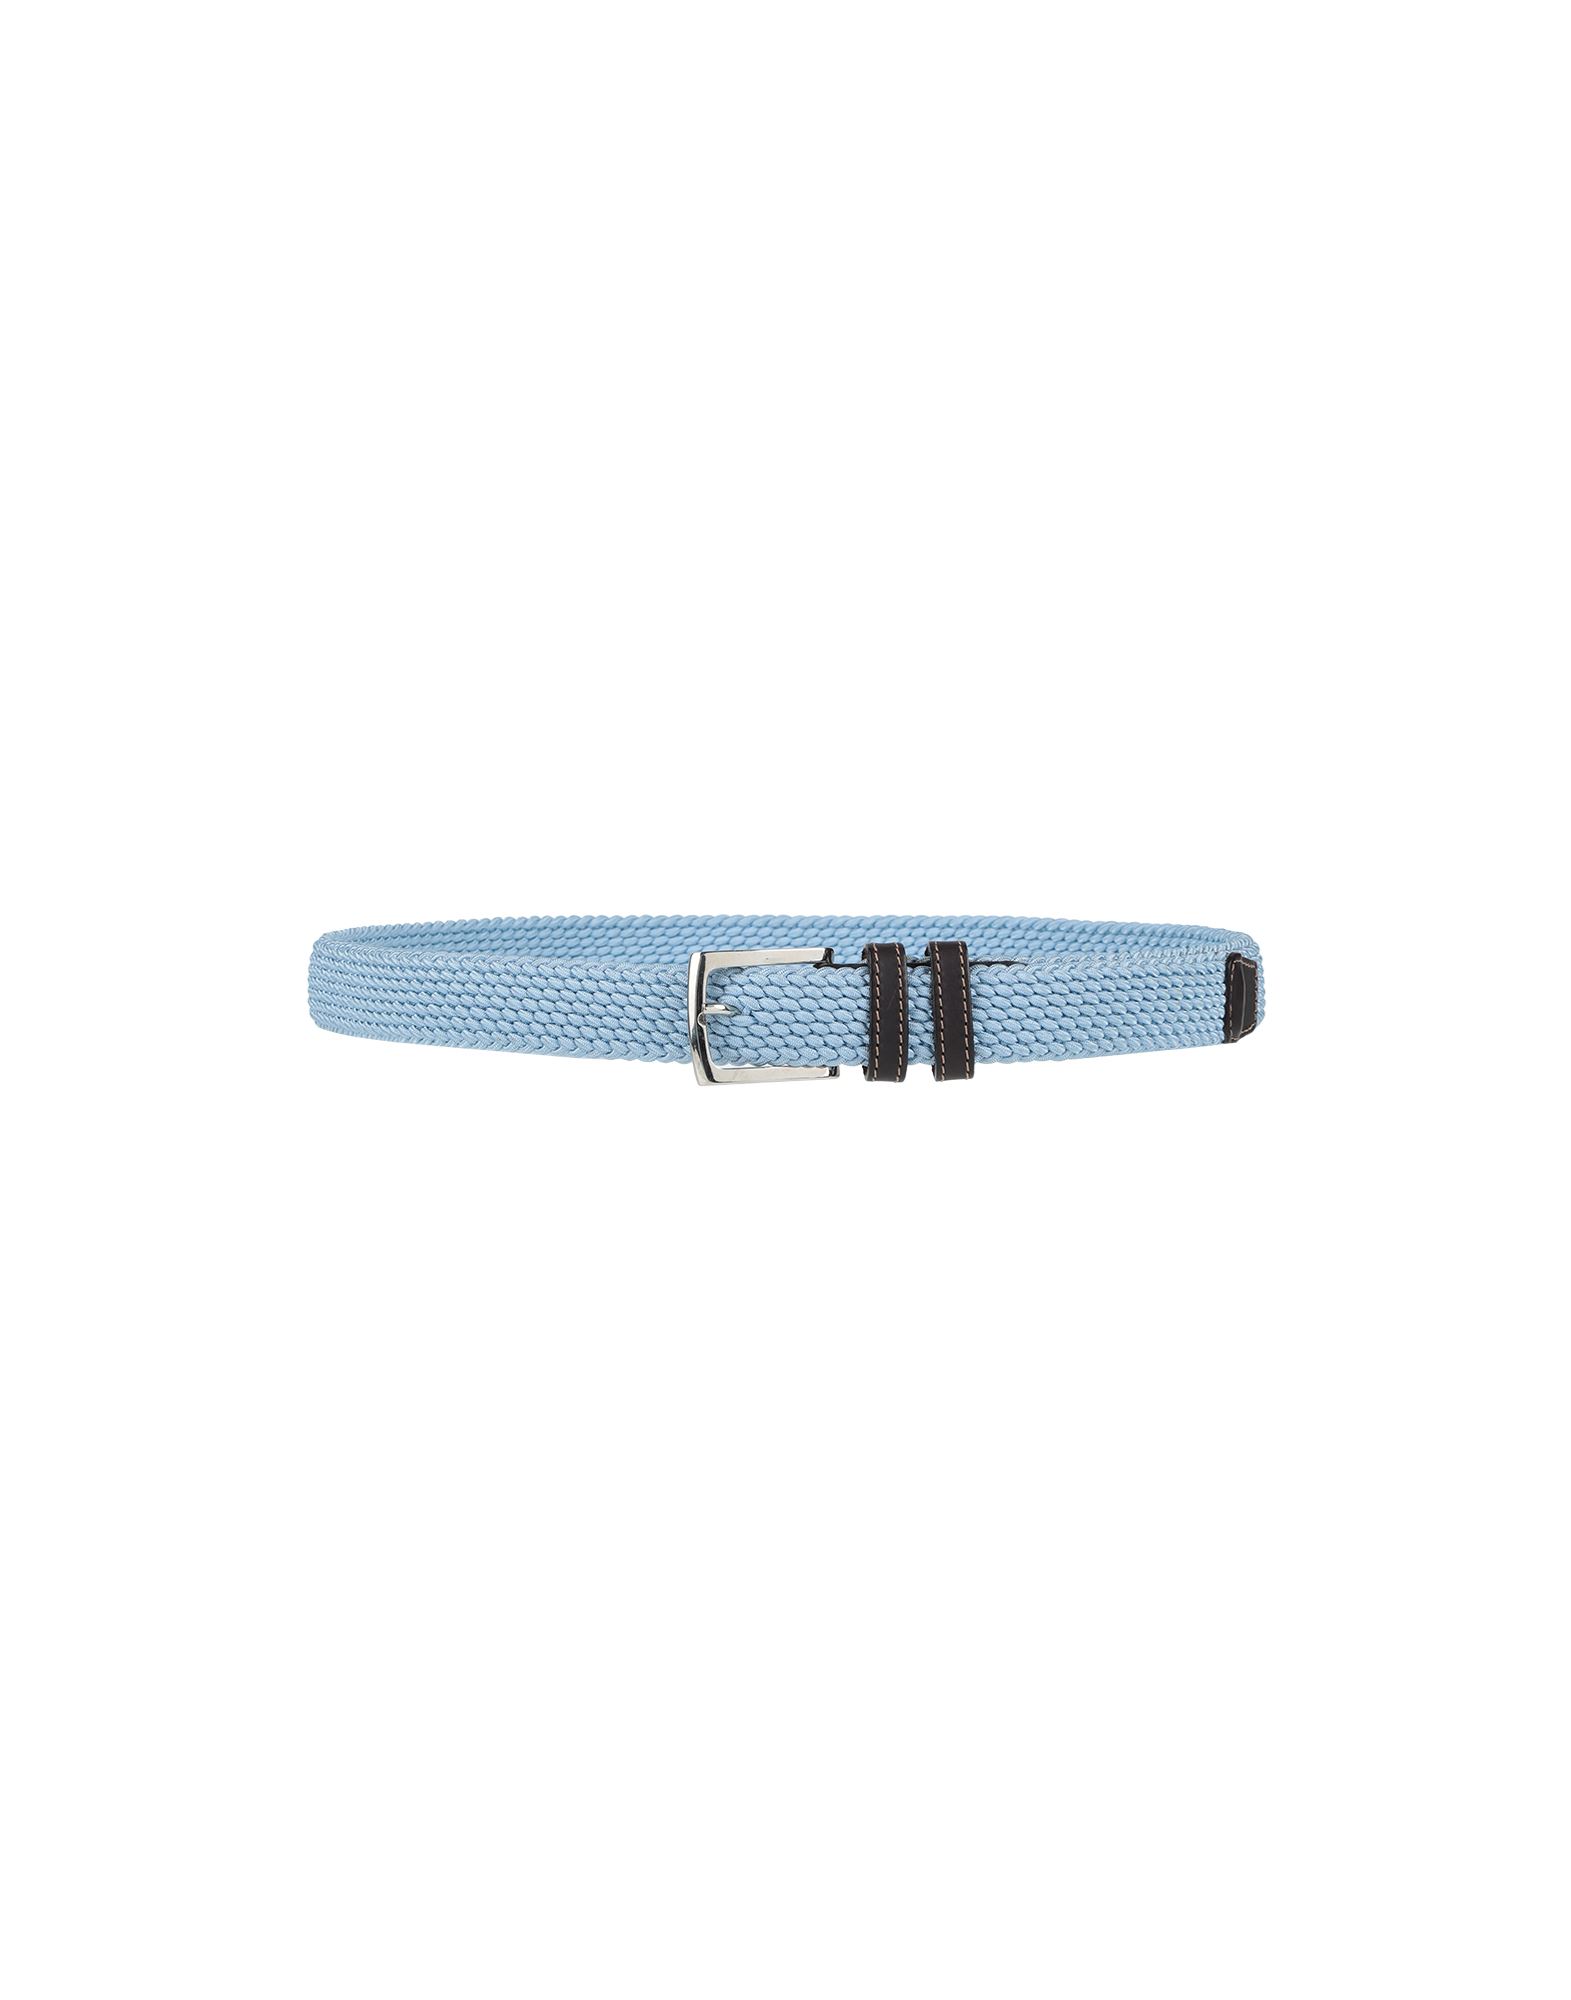 Andrea D'amico Belts In Sky Blue